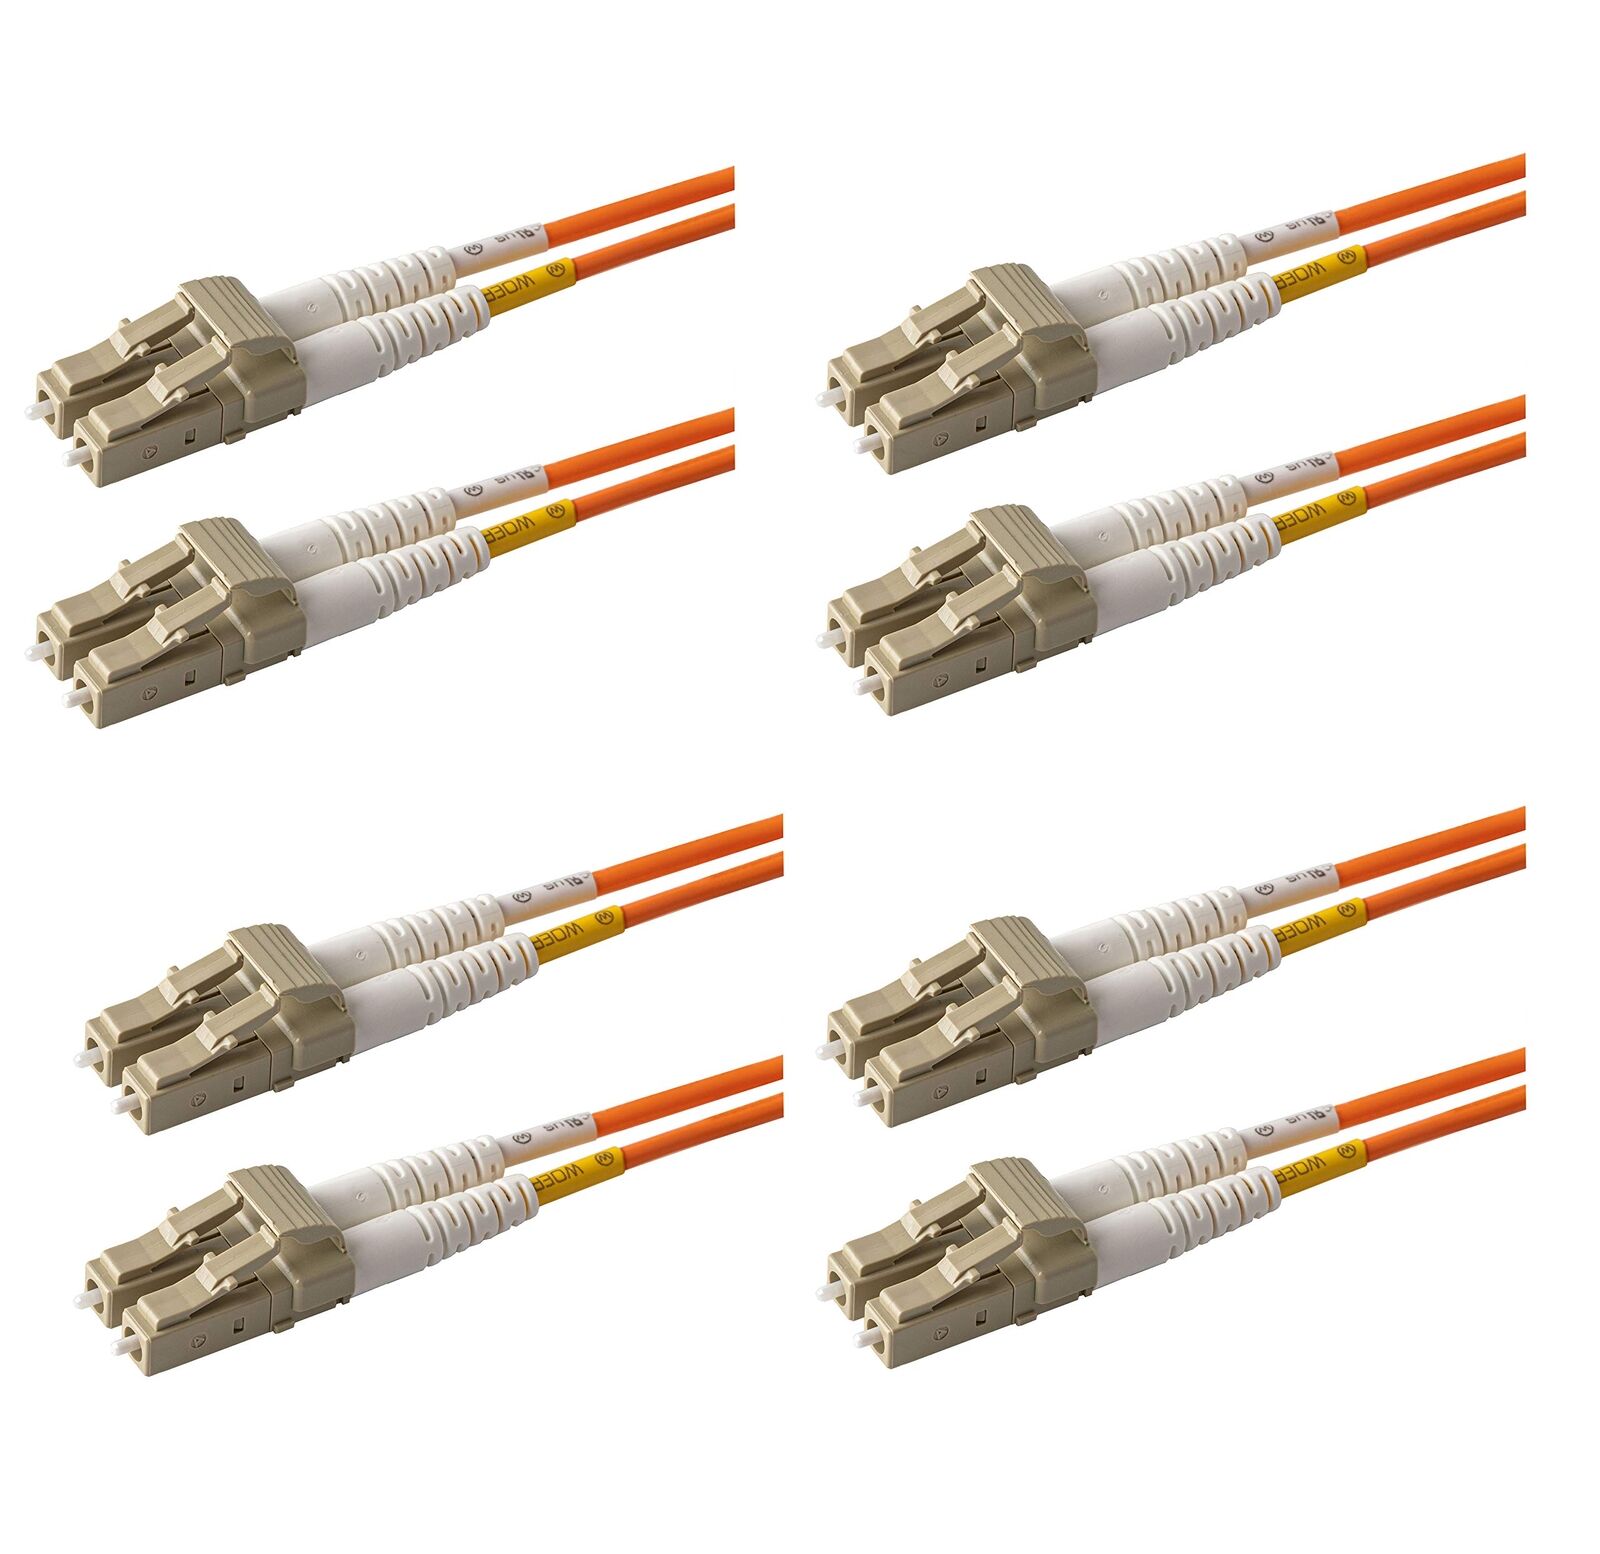 - 4-Pack 3 Meter Multimode OM1 62.5/125 Fiber Optic Patch Cable, Duplex LC to...